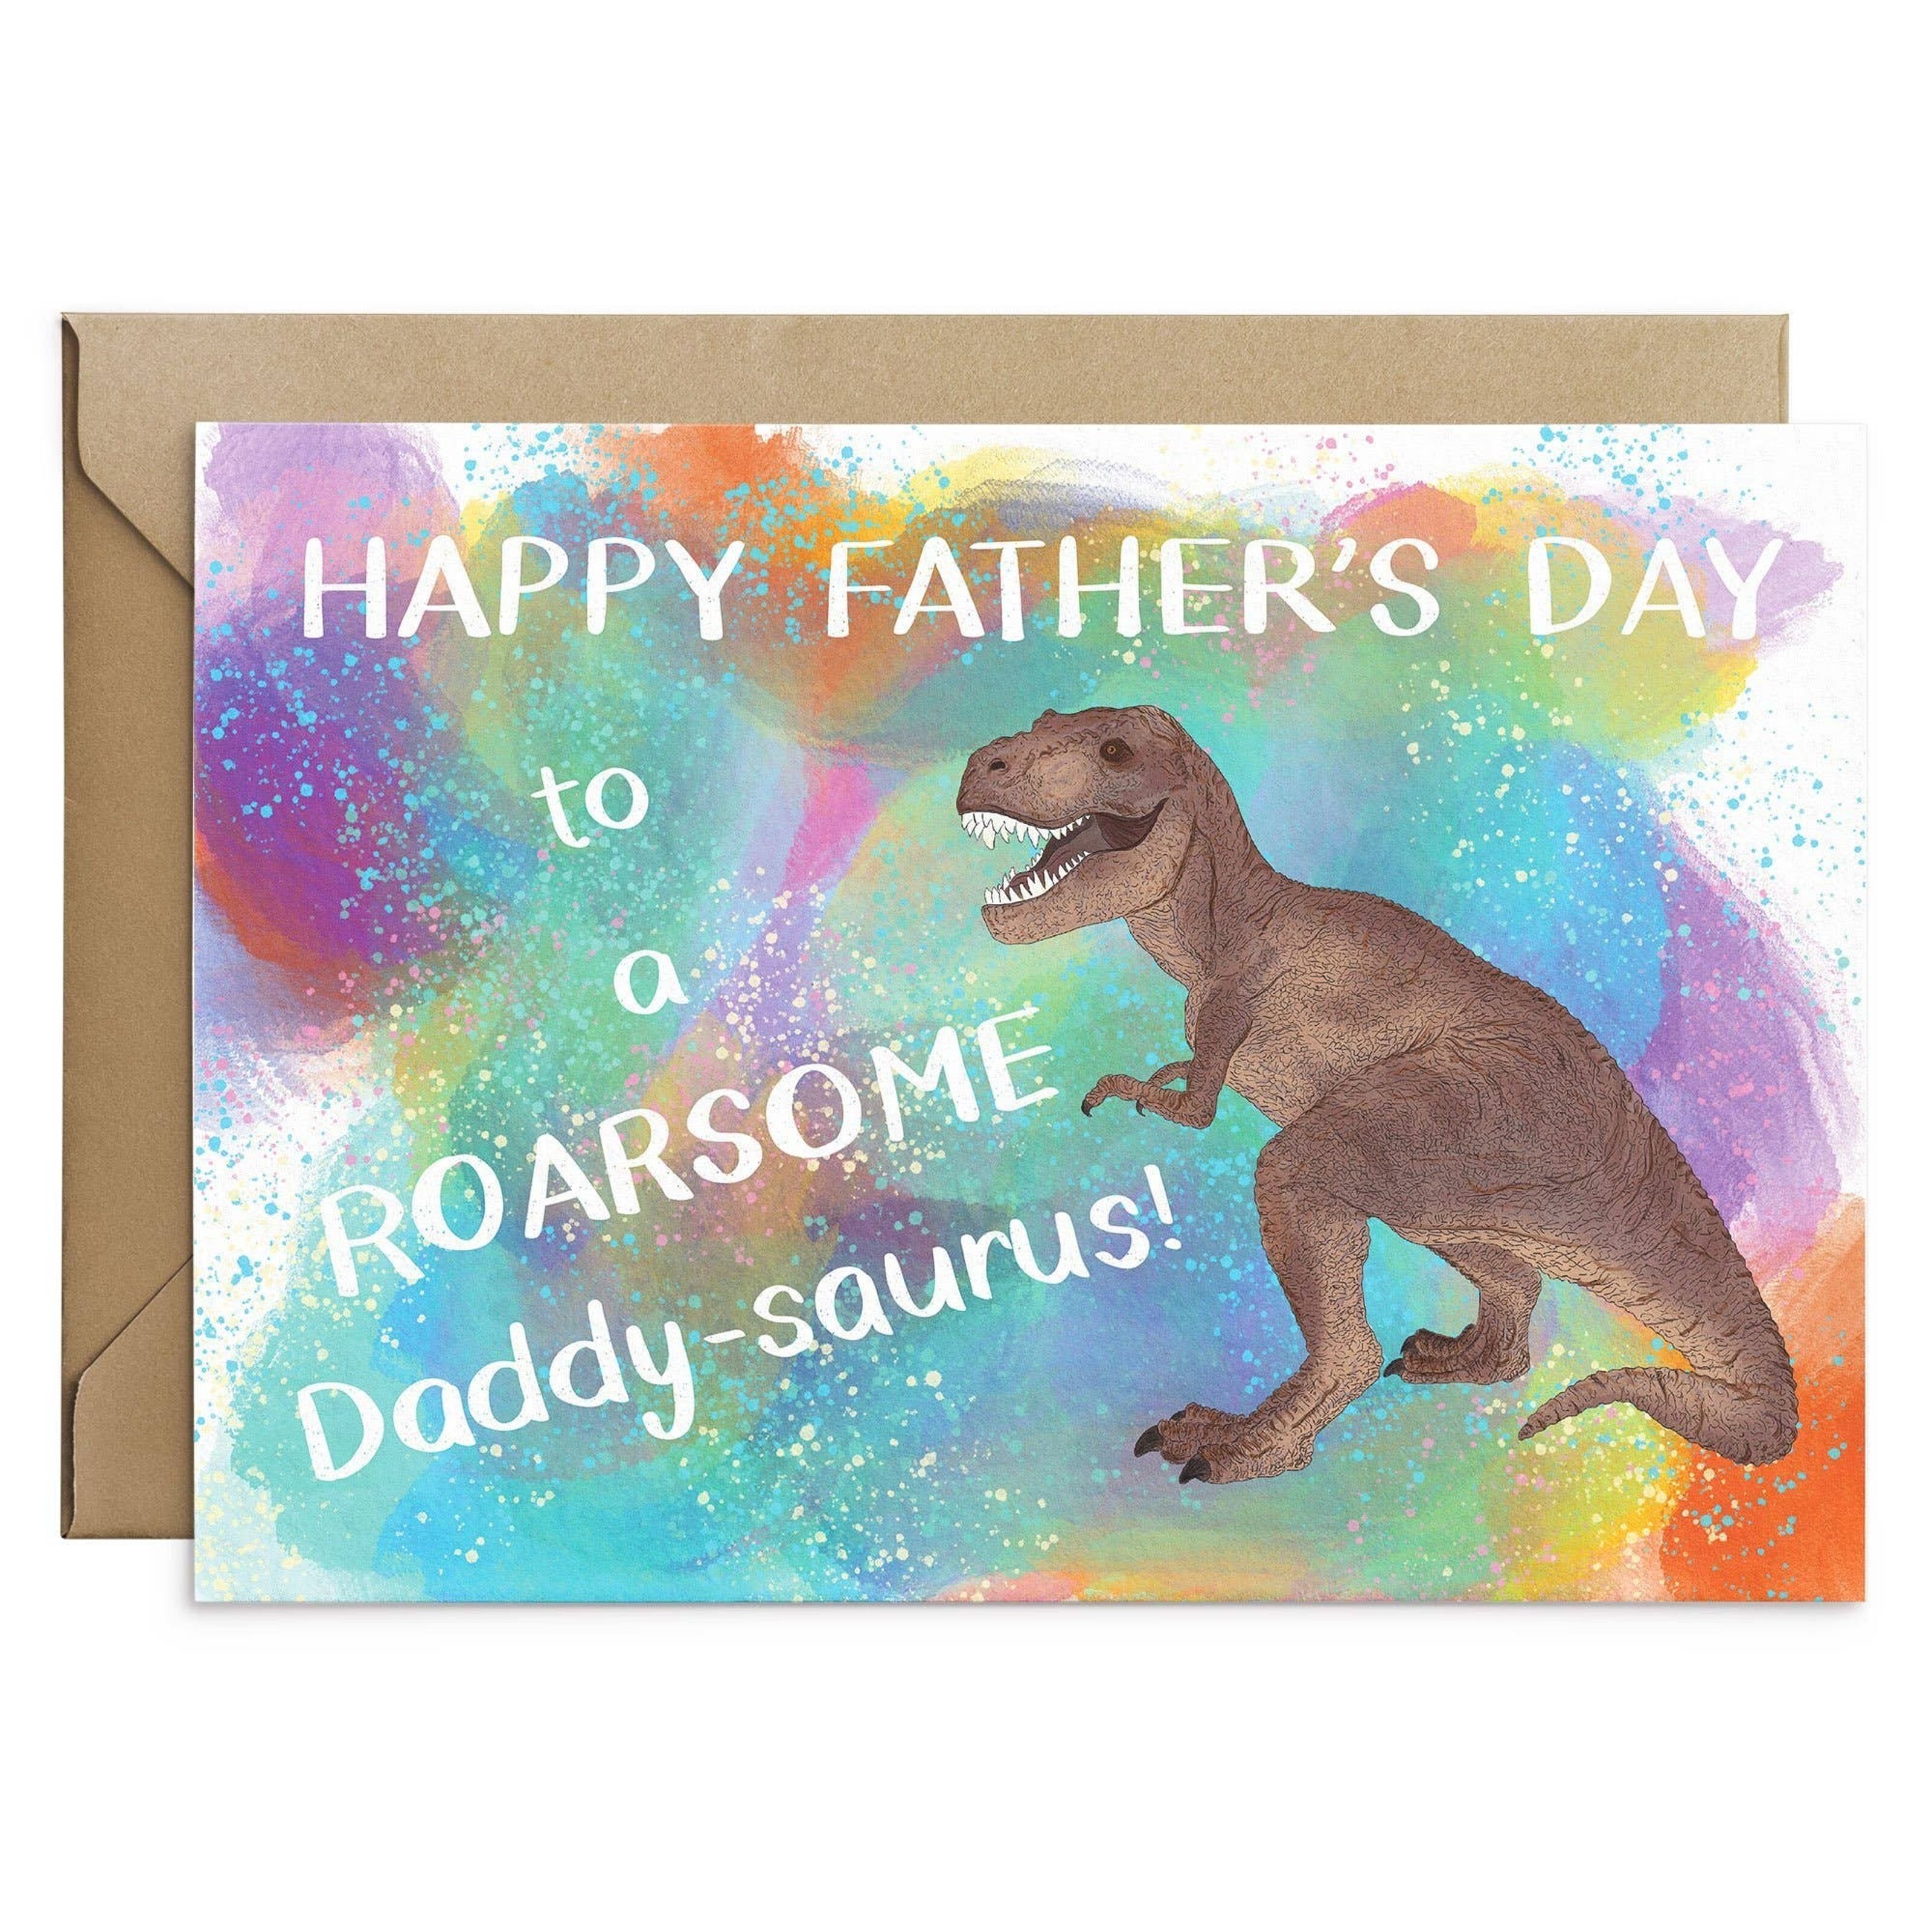 Dad You Are Roarsome Father's Day Card – Evercarts